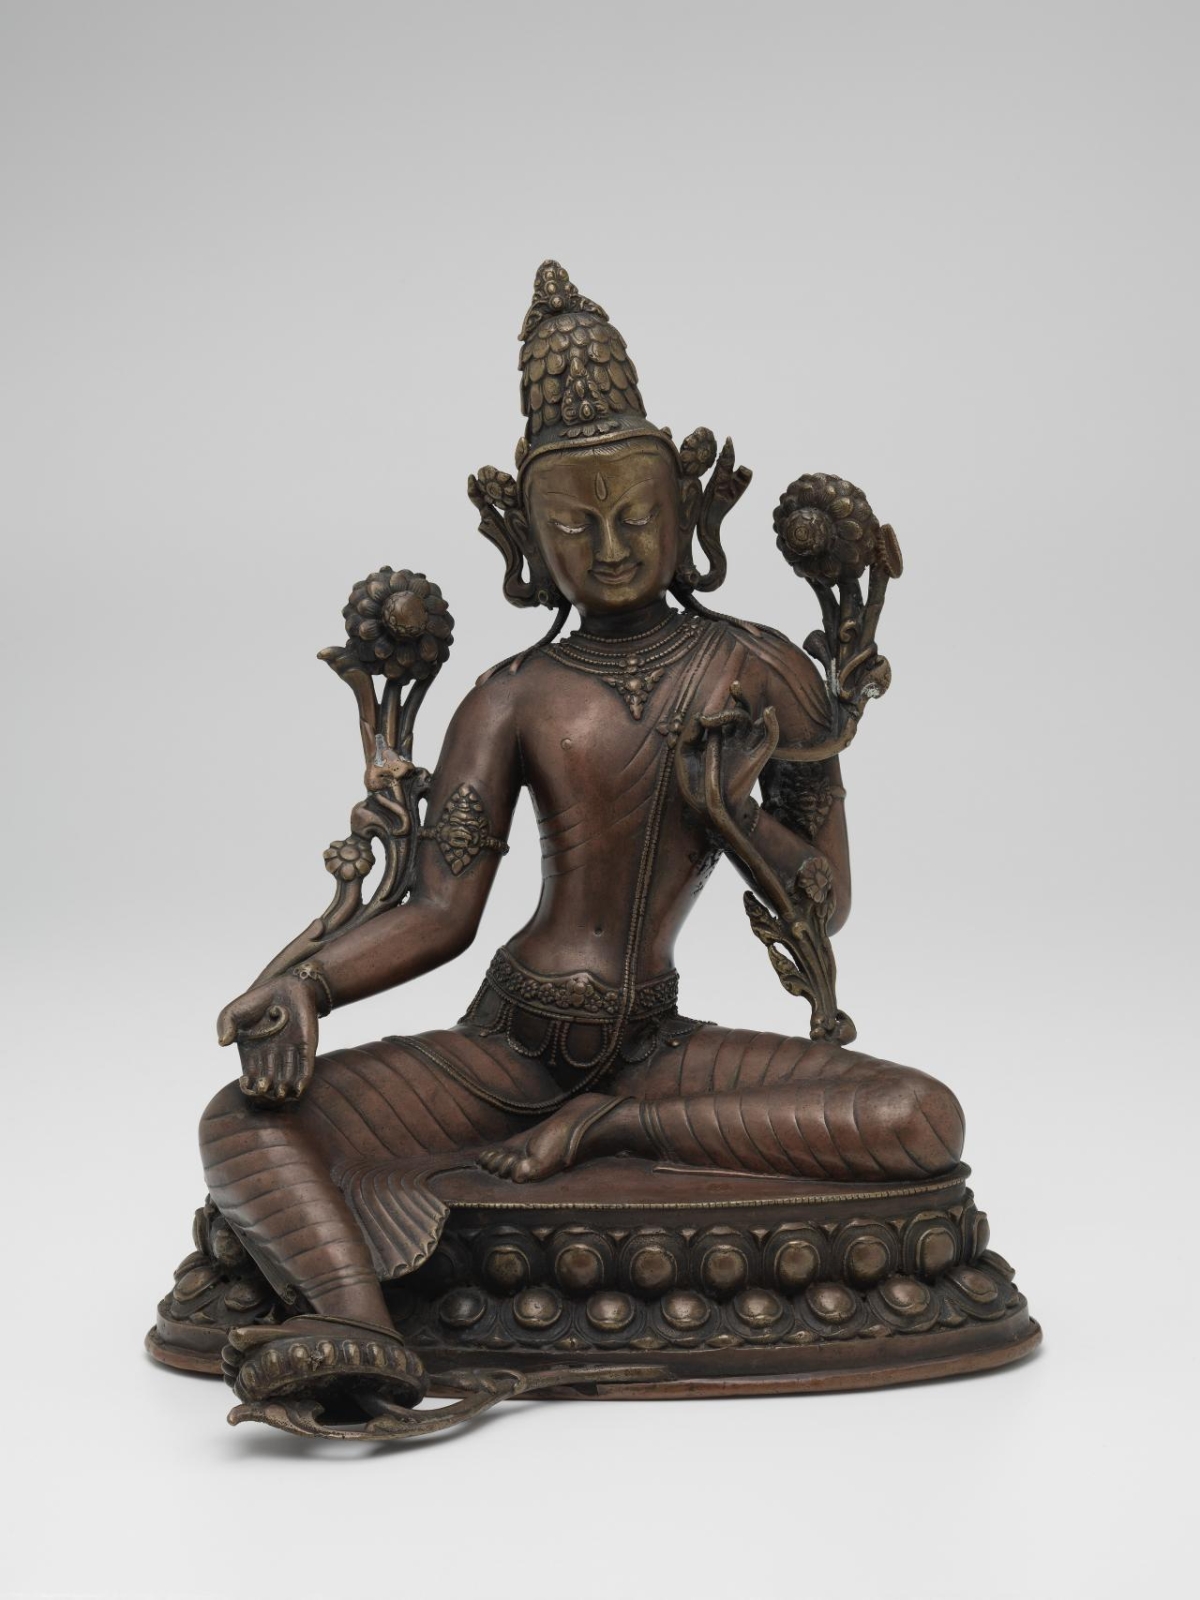 Nepalese Avalokiteshvara, 15th century copper alloy, silver, pigment, gilt 32.8 × 27.0 × 24.0 cm National Gallery of Victoria, Melbourne Purchased, 1975